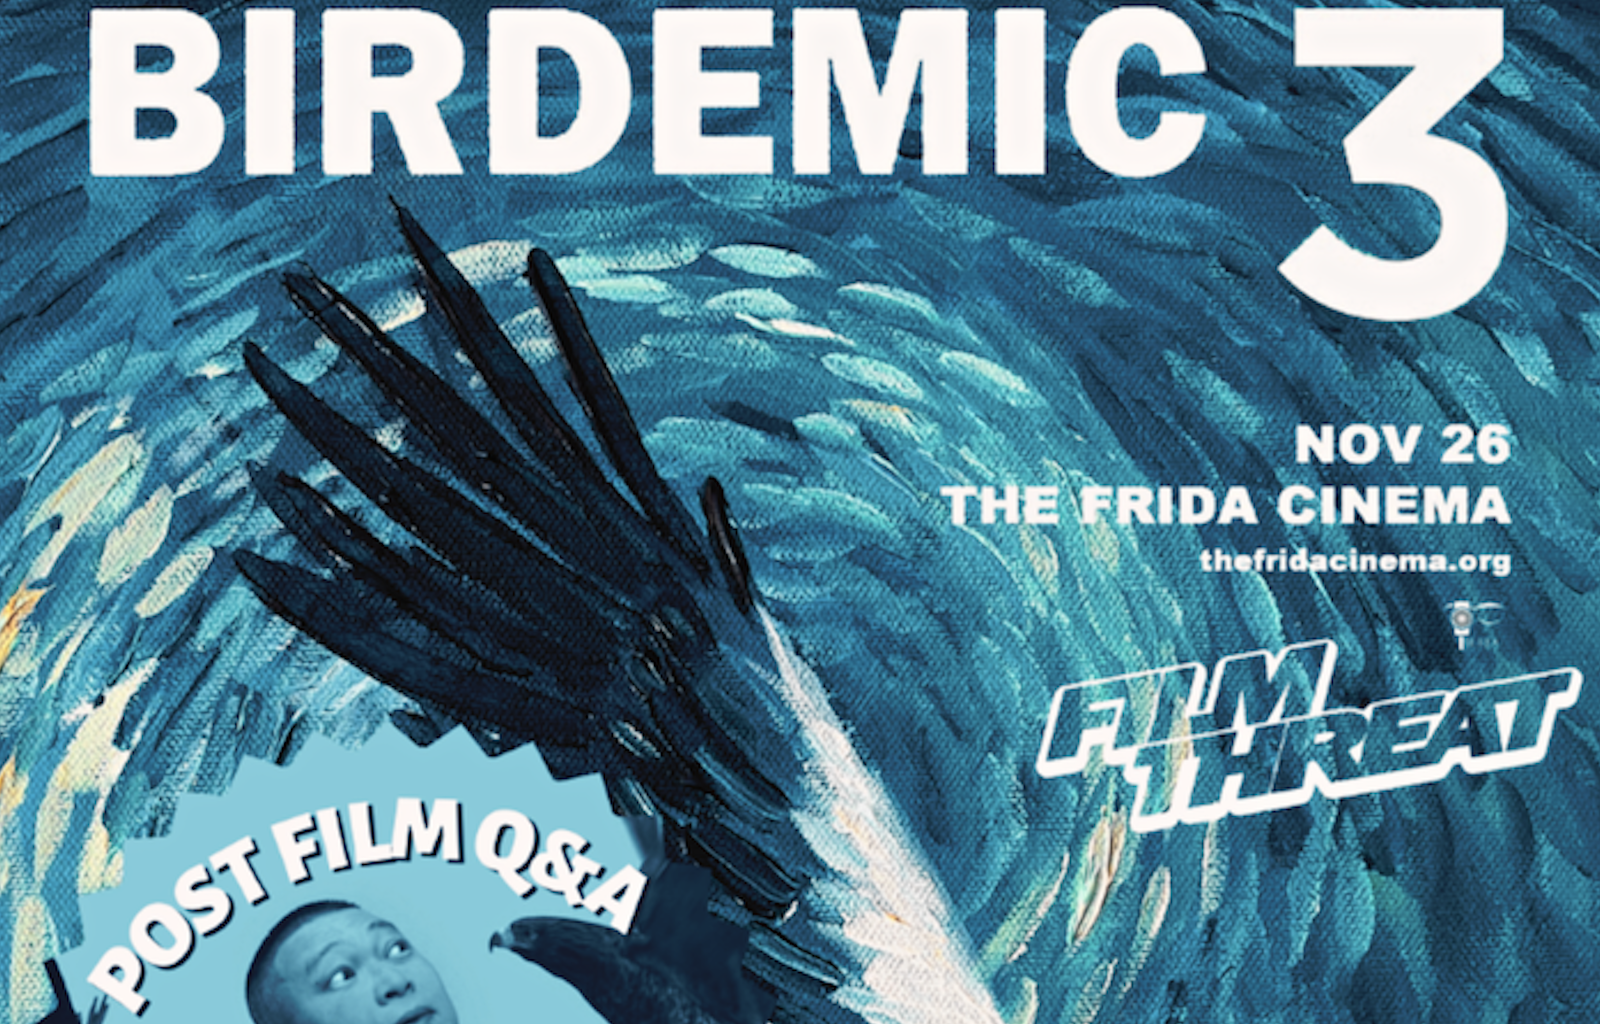 See Birdemic 3 for Free at The Frida Cinema